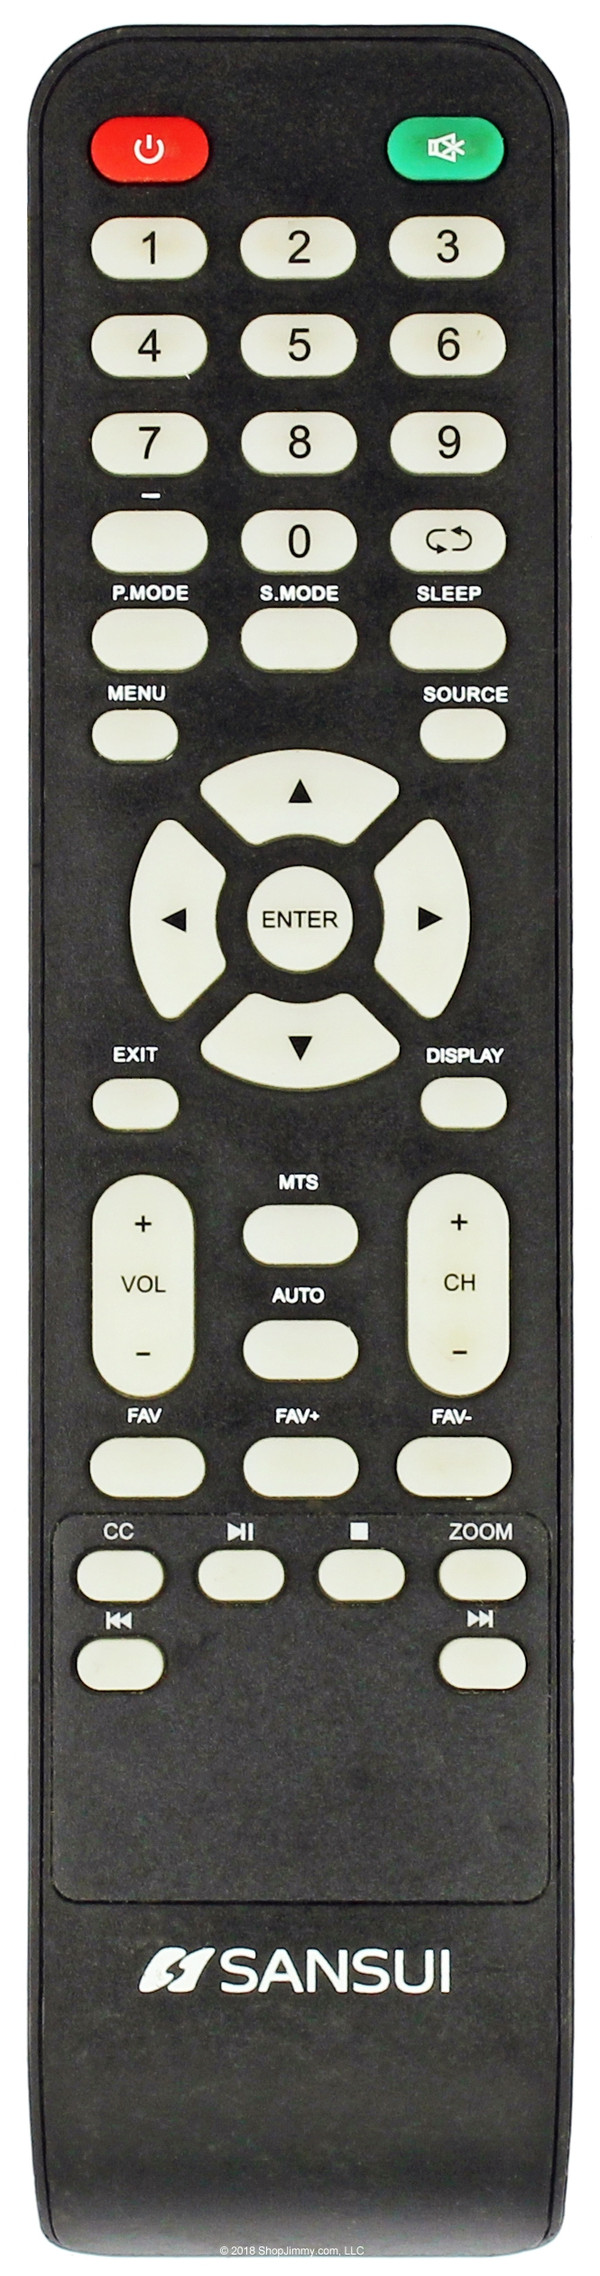 Sansui Remote Control for SLED6516 -- Open Bag